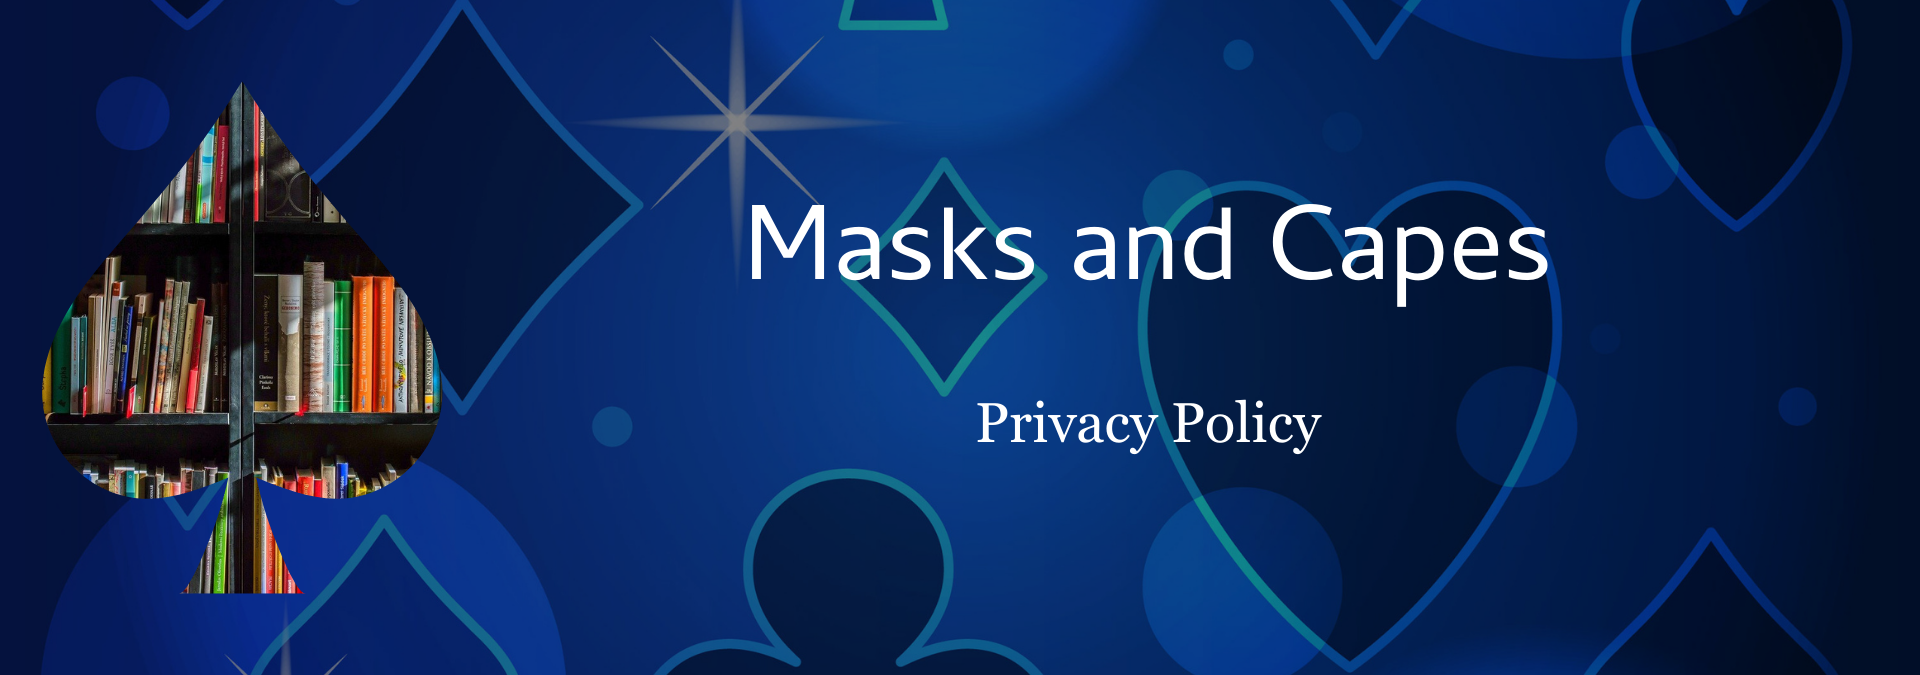 Masks and Capes: Privacy Policy for Antihero Kreative, the company of Andria Kennedy, Virginia Freelance Content Writer